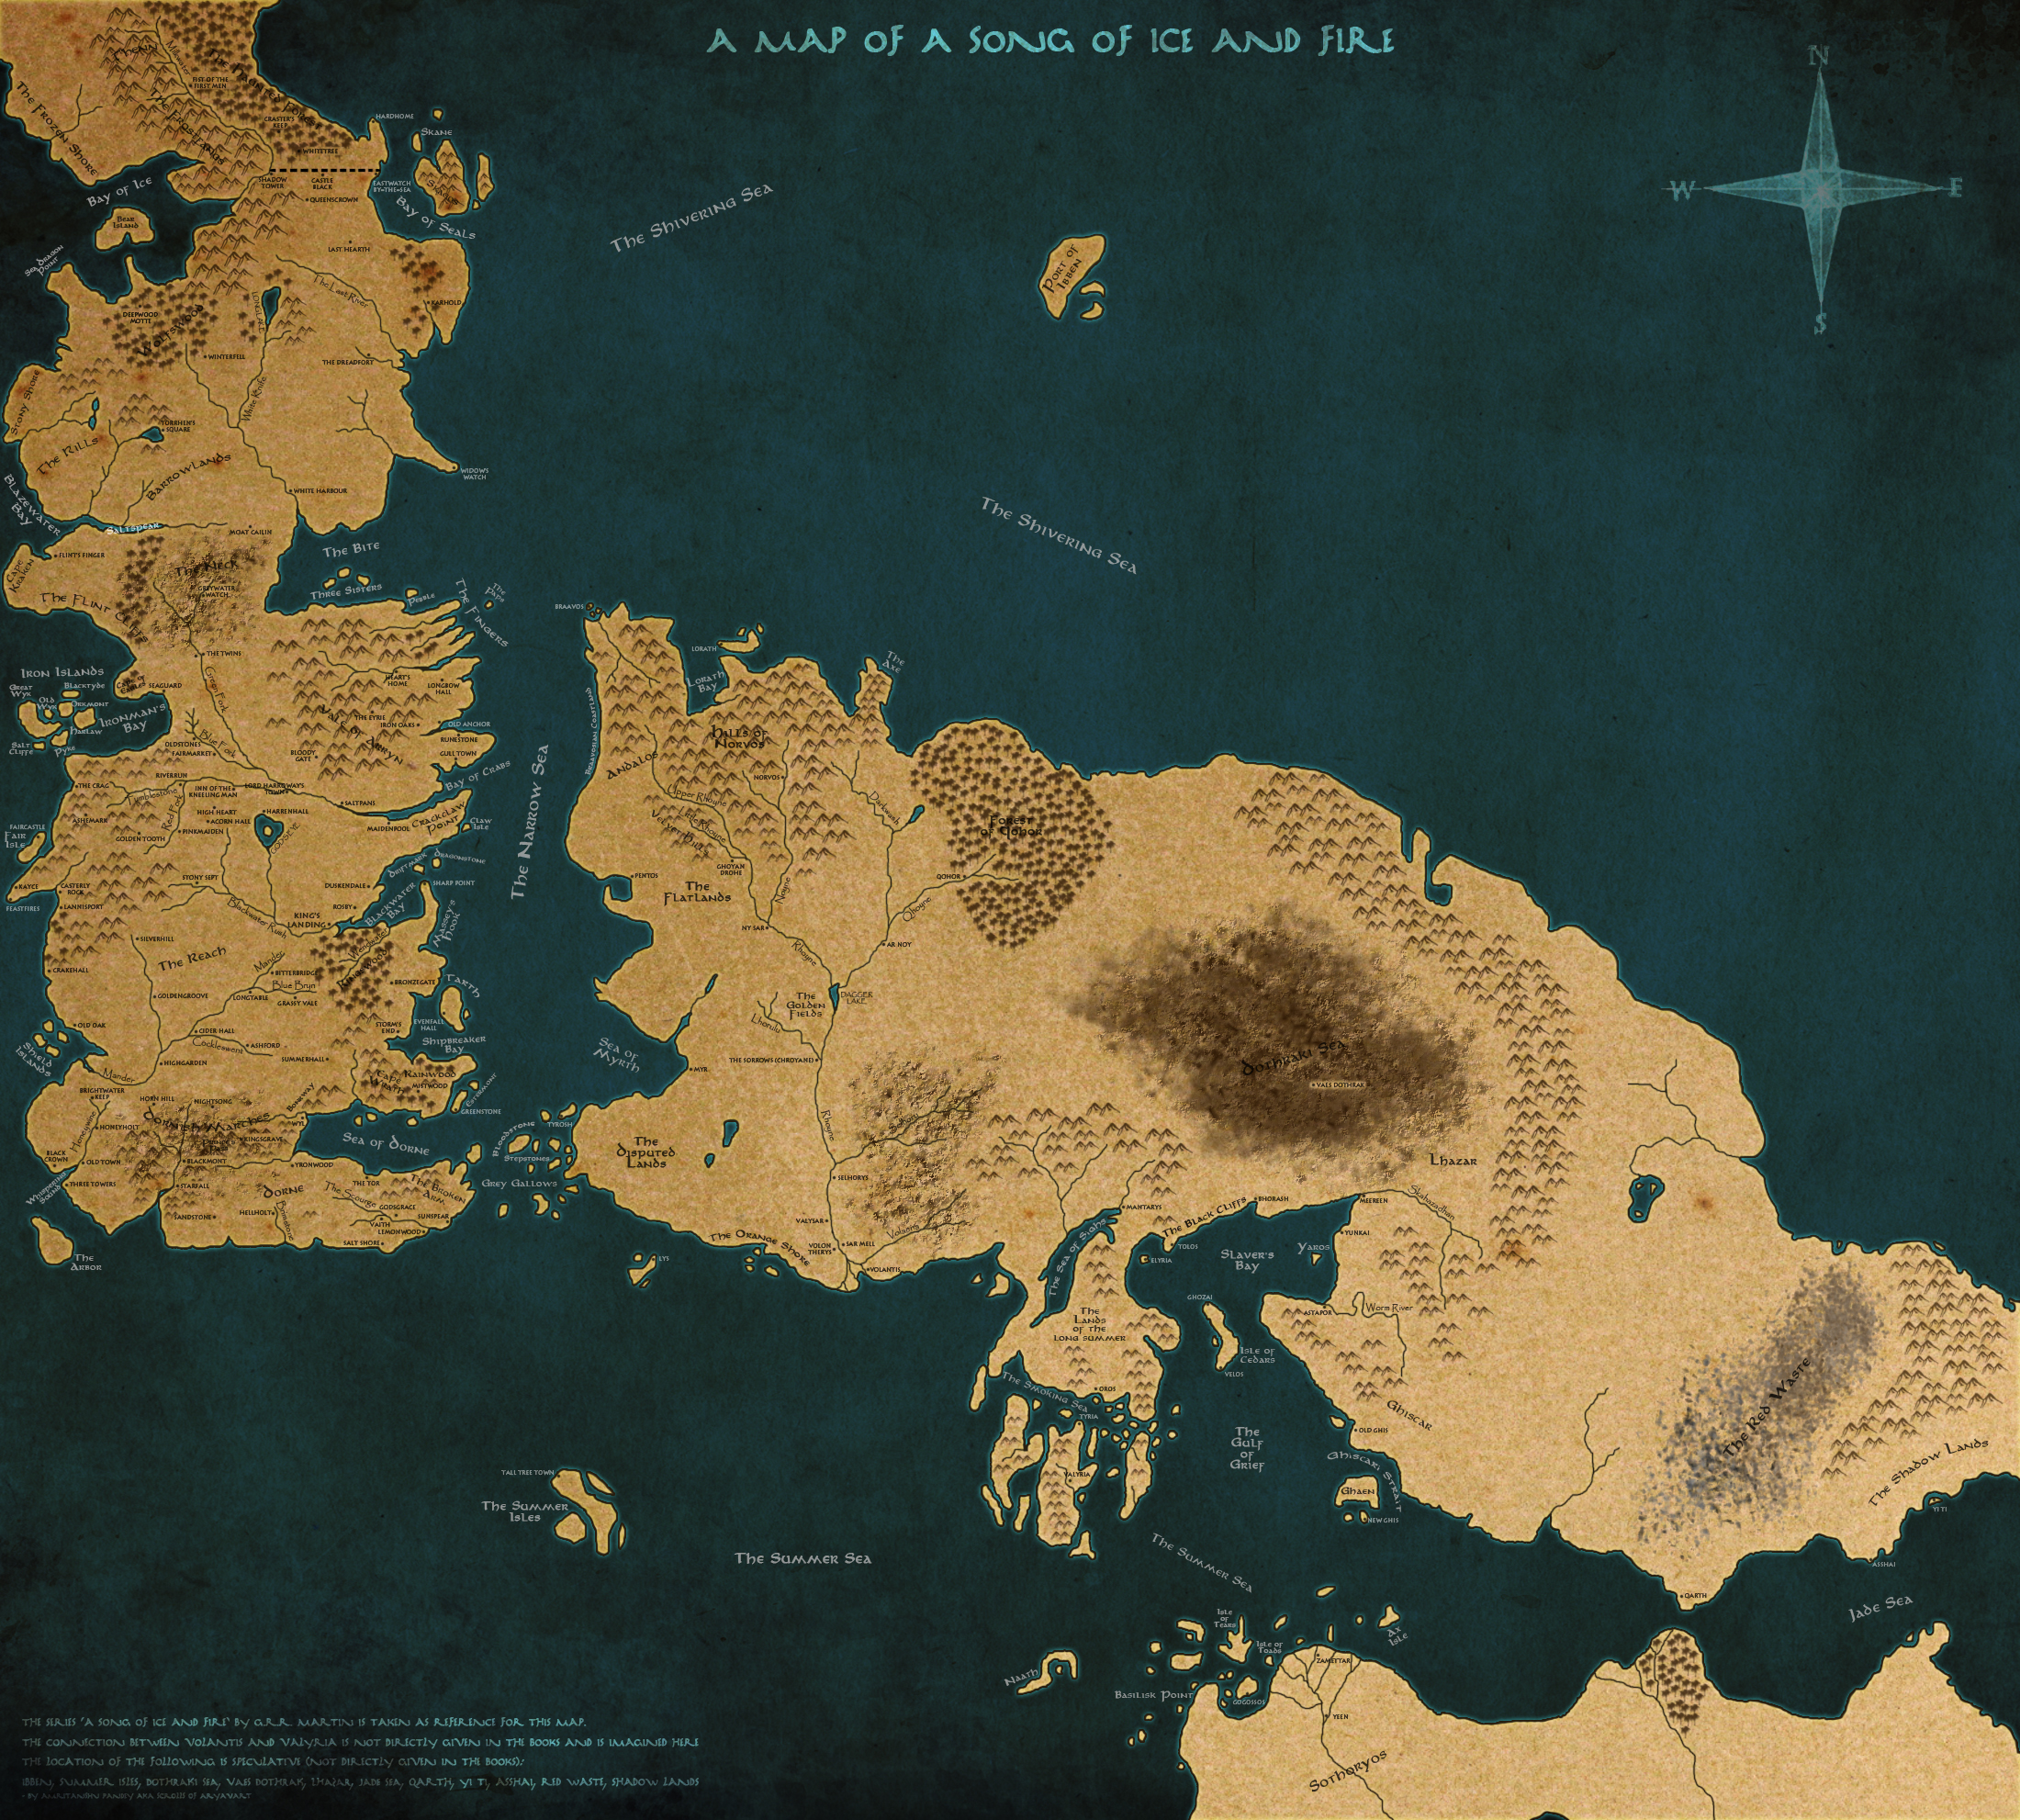 A Song Of Ice And Fire Hd Wallpapers, Desktop Wallpaper - Mapa A Song Of Ice And Fire - HD Wallpaper 